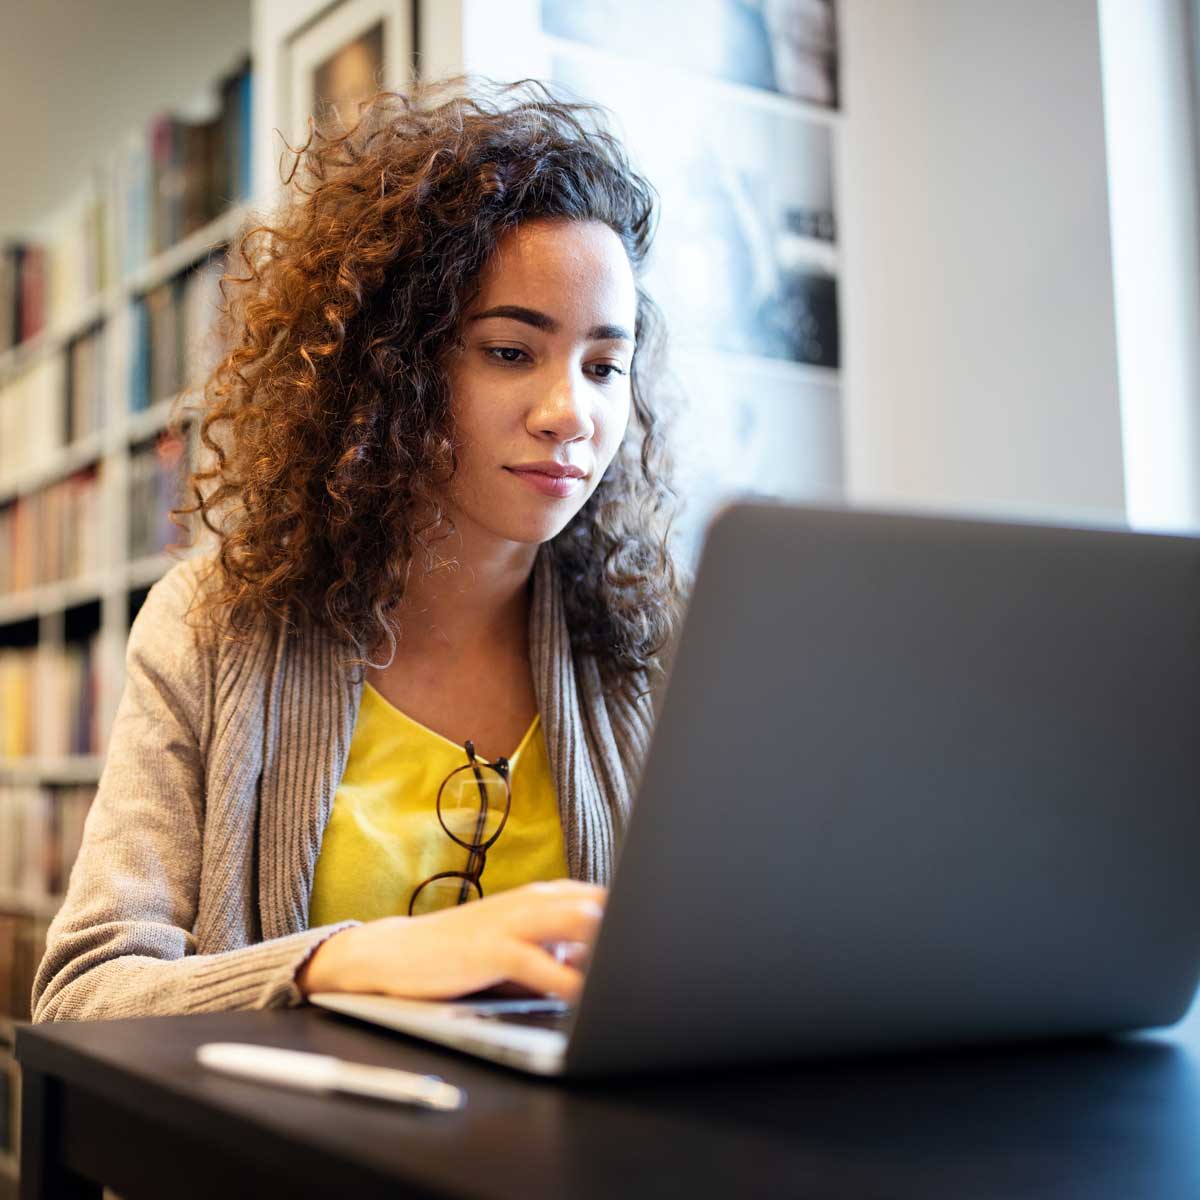 recent female college graduate sitting at a laptop analyzing student loan repayment options and plans and forbearance; sitting in a library with a book case behind her